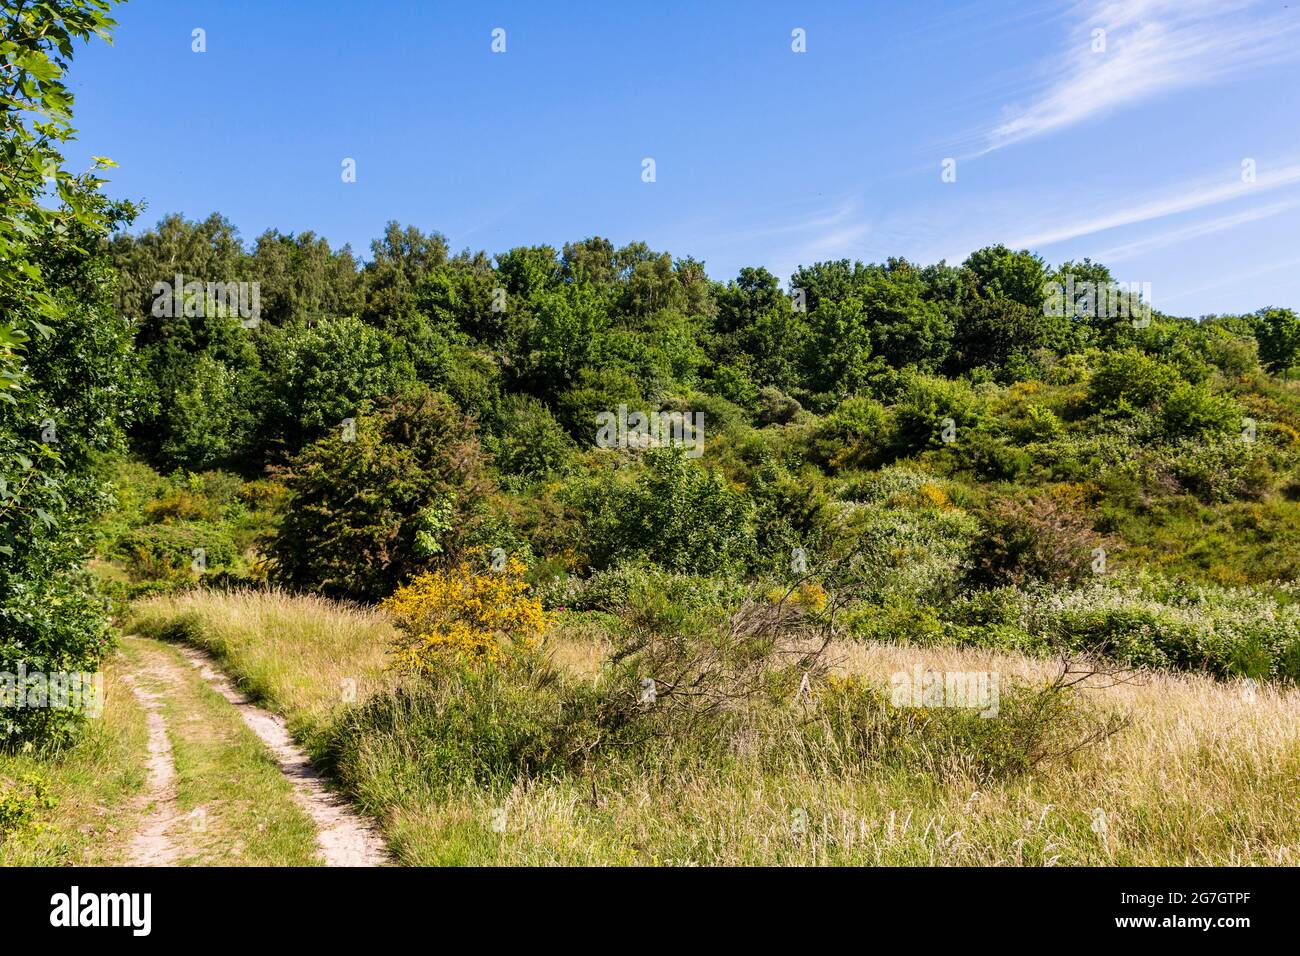 landscape at the nature reserve Dornbusch, Germany, Hiddensee Stock Photo